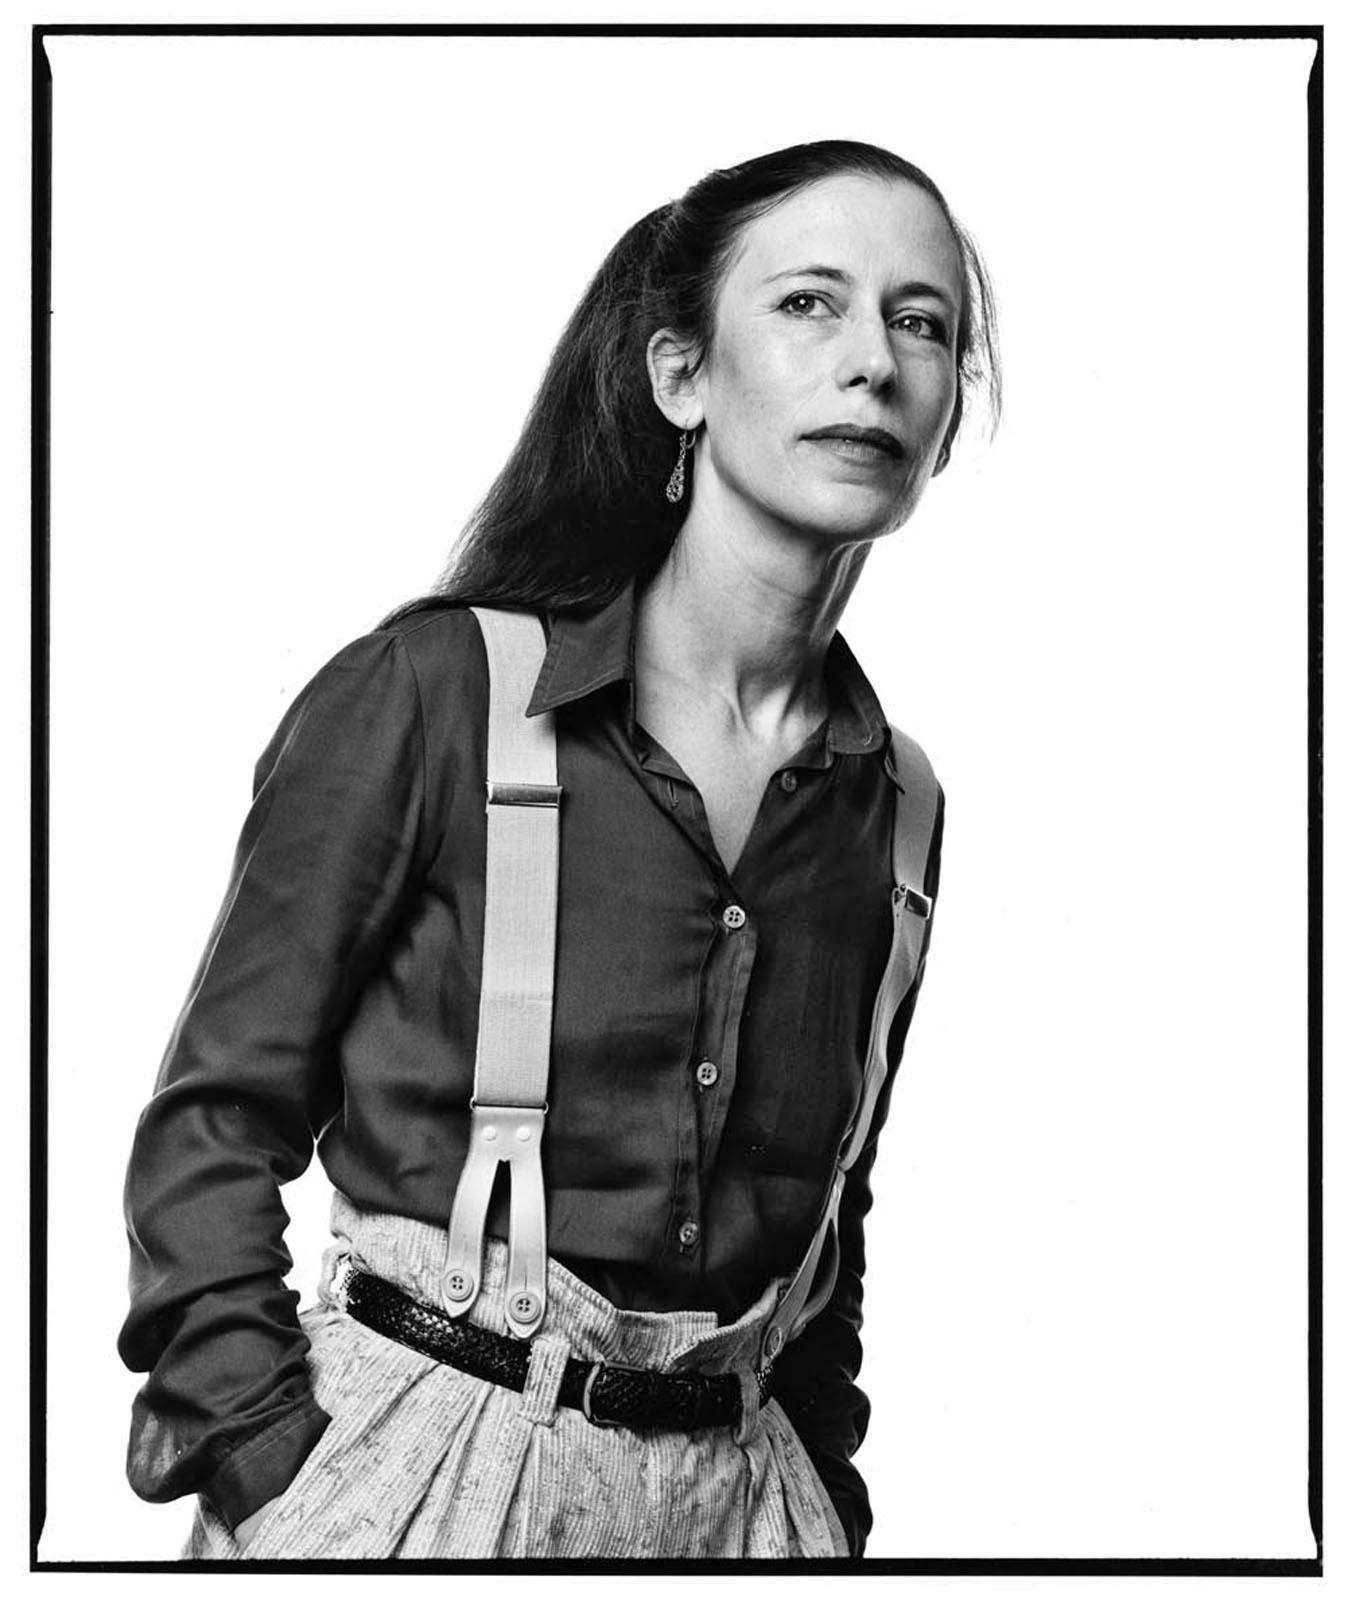 Jack Mitchell Black and White Photograph - Multi-disciplinary artist & composer Meredith Monk  